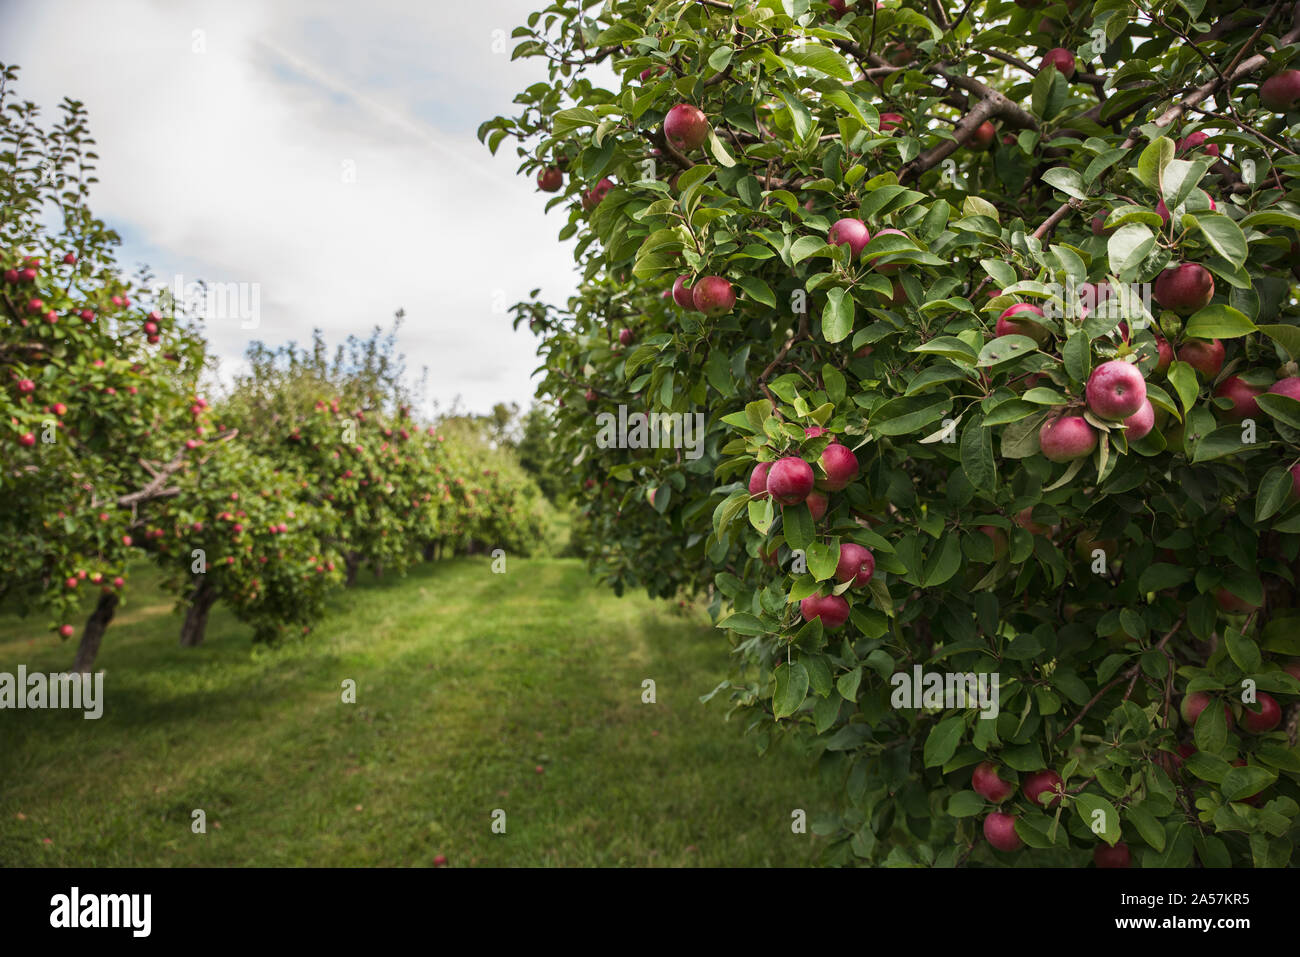 Ripe red apples on an apple tree in an apple orchard. Stock Photo